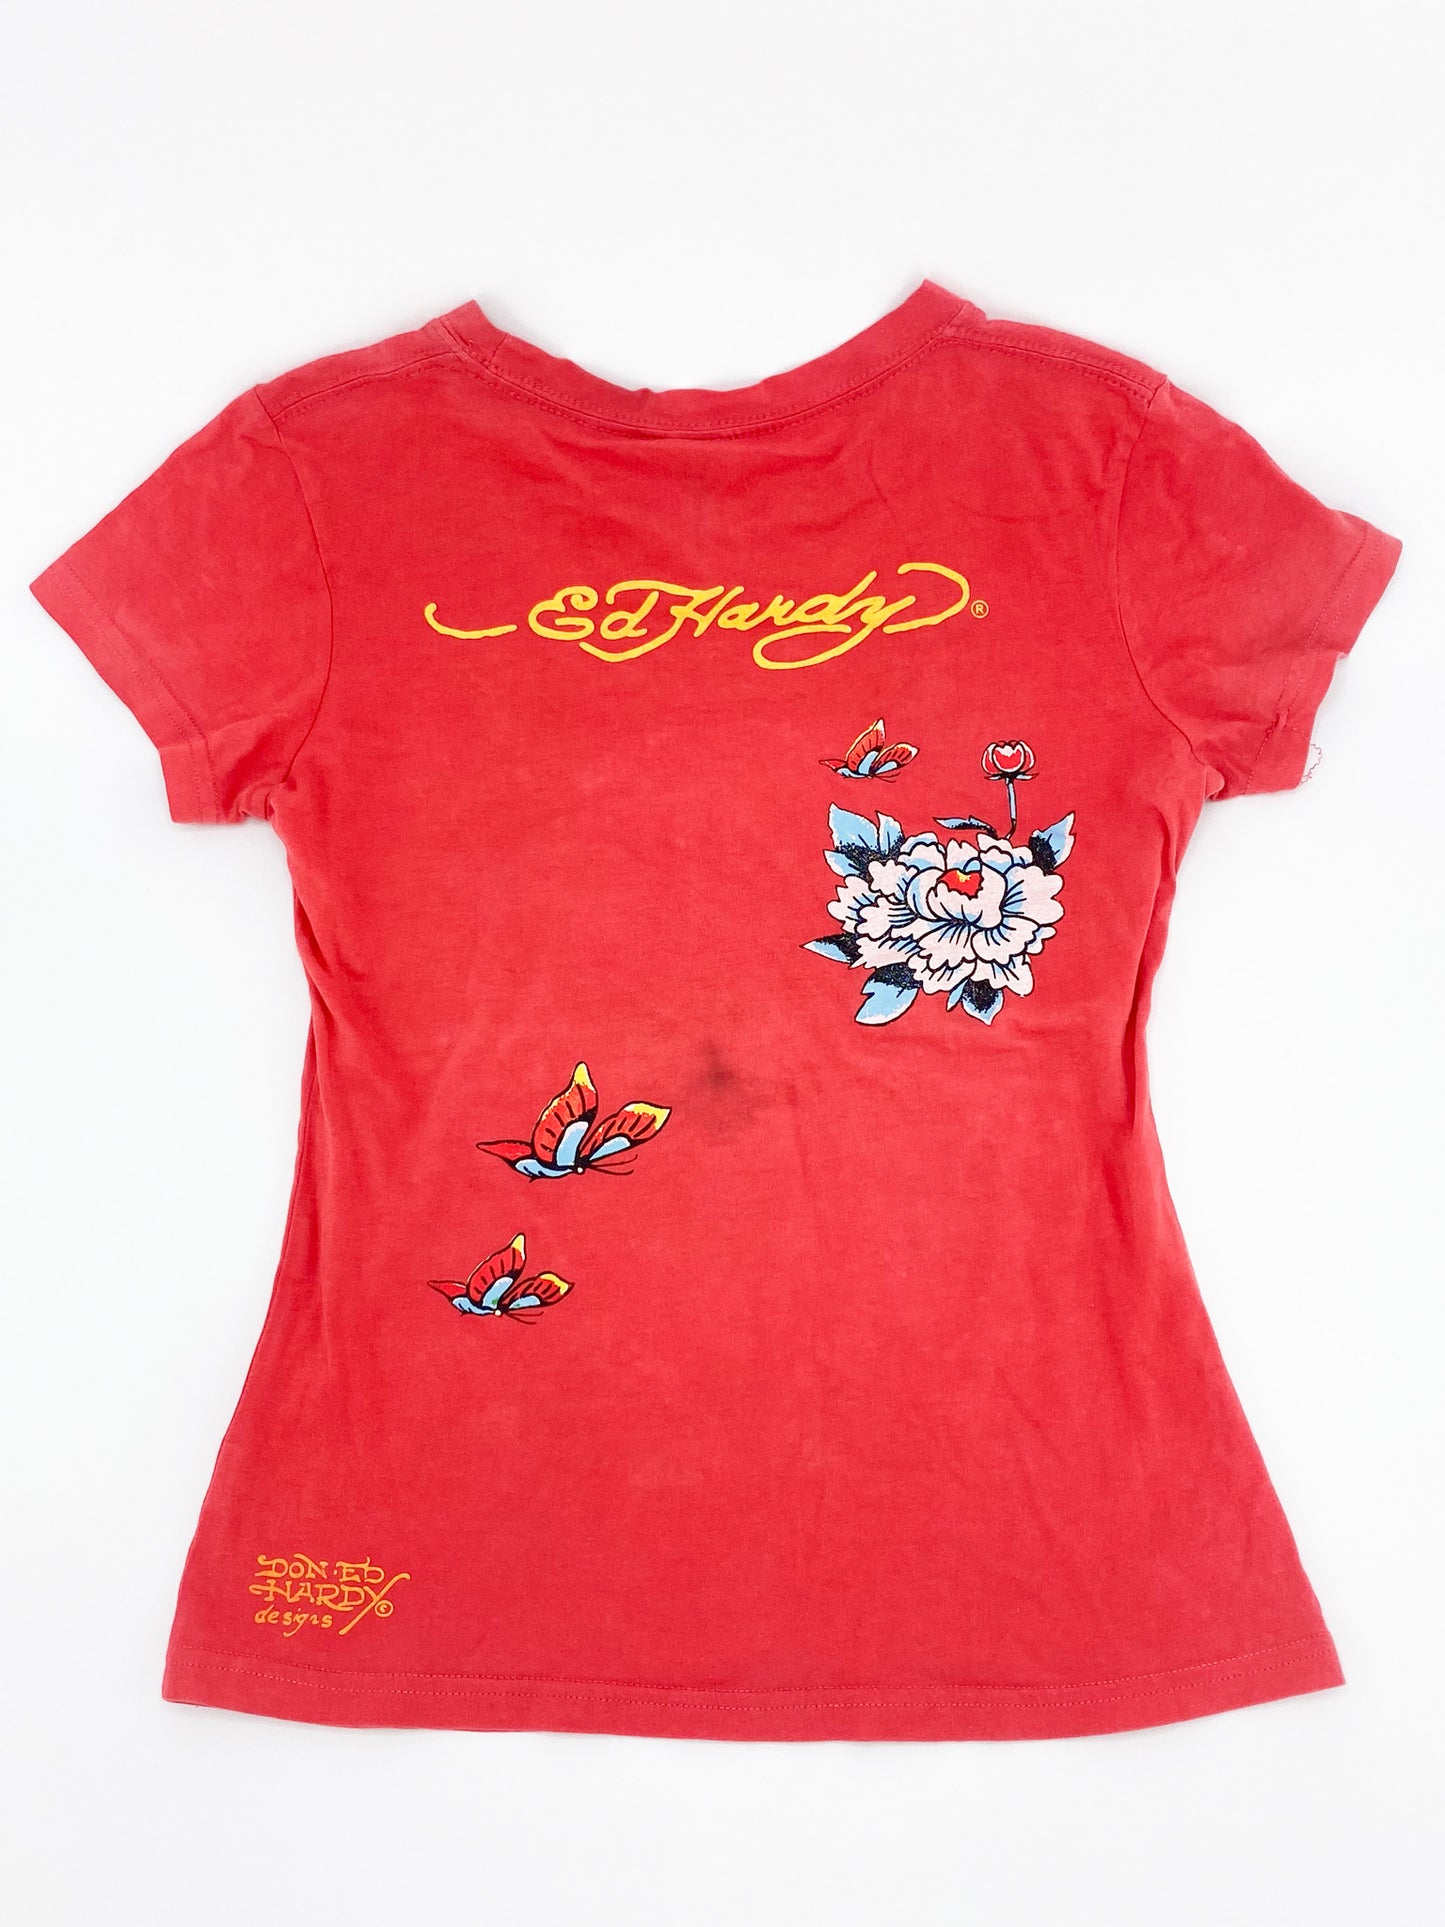 Vintage 00's Ed Hardy Red Baby Tee - M